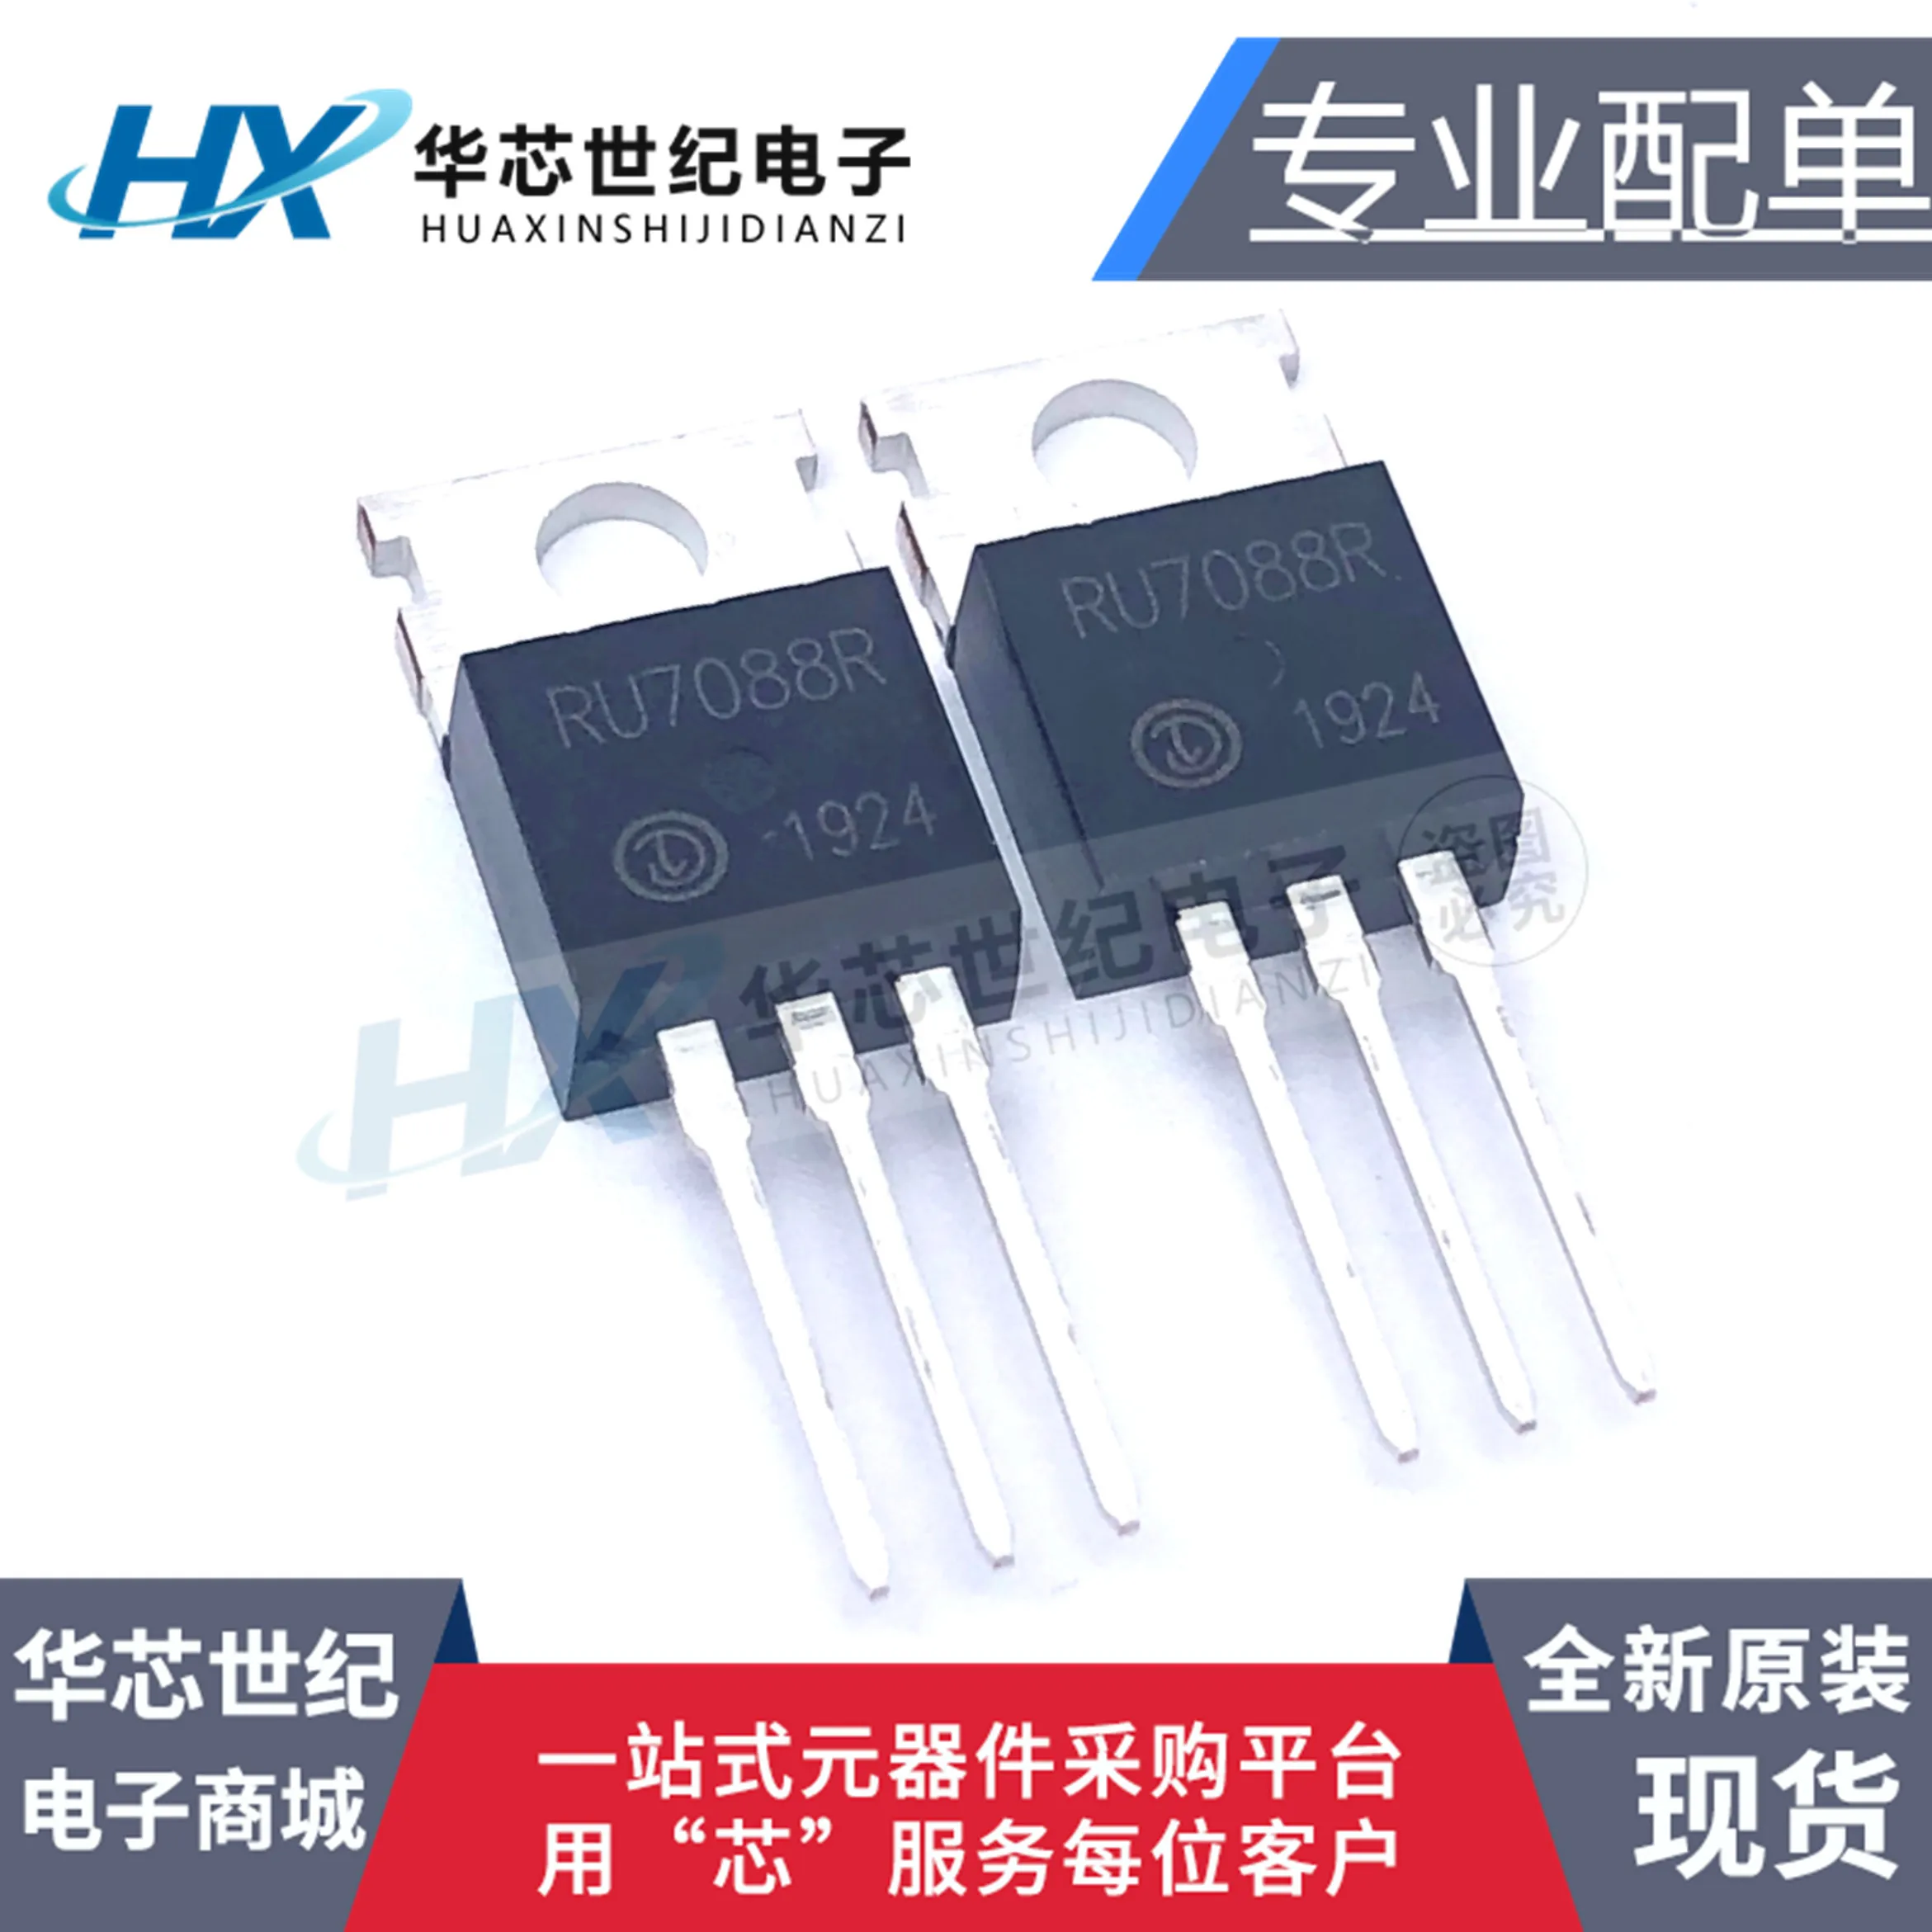 

30pcs original new RU7088R MOSFET 80A 70V Electric Vehicle Controller Charger Commonly Used